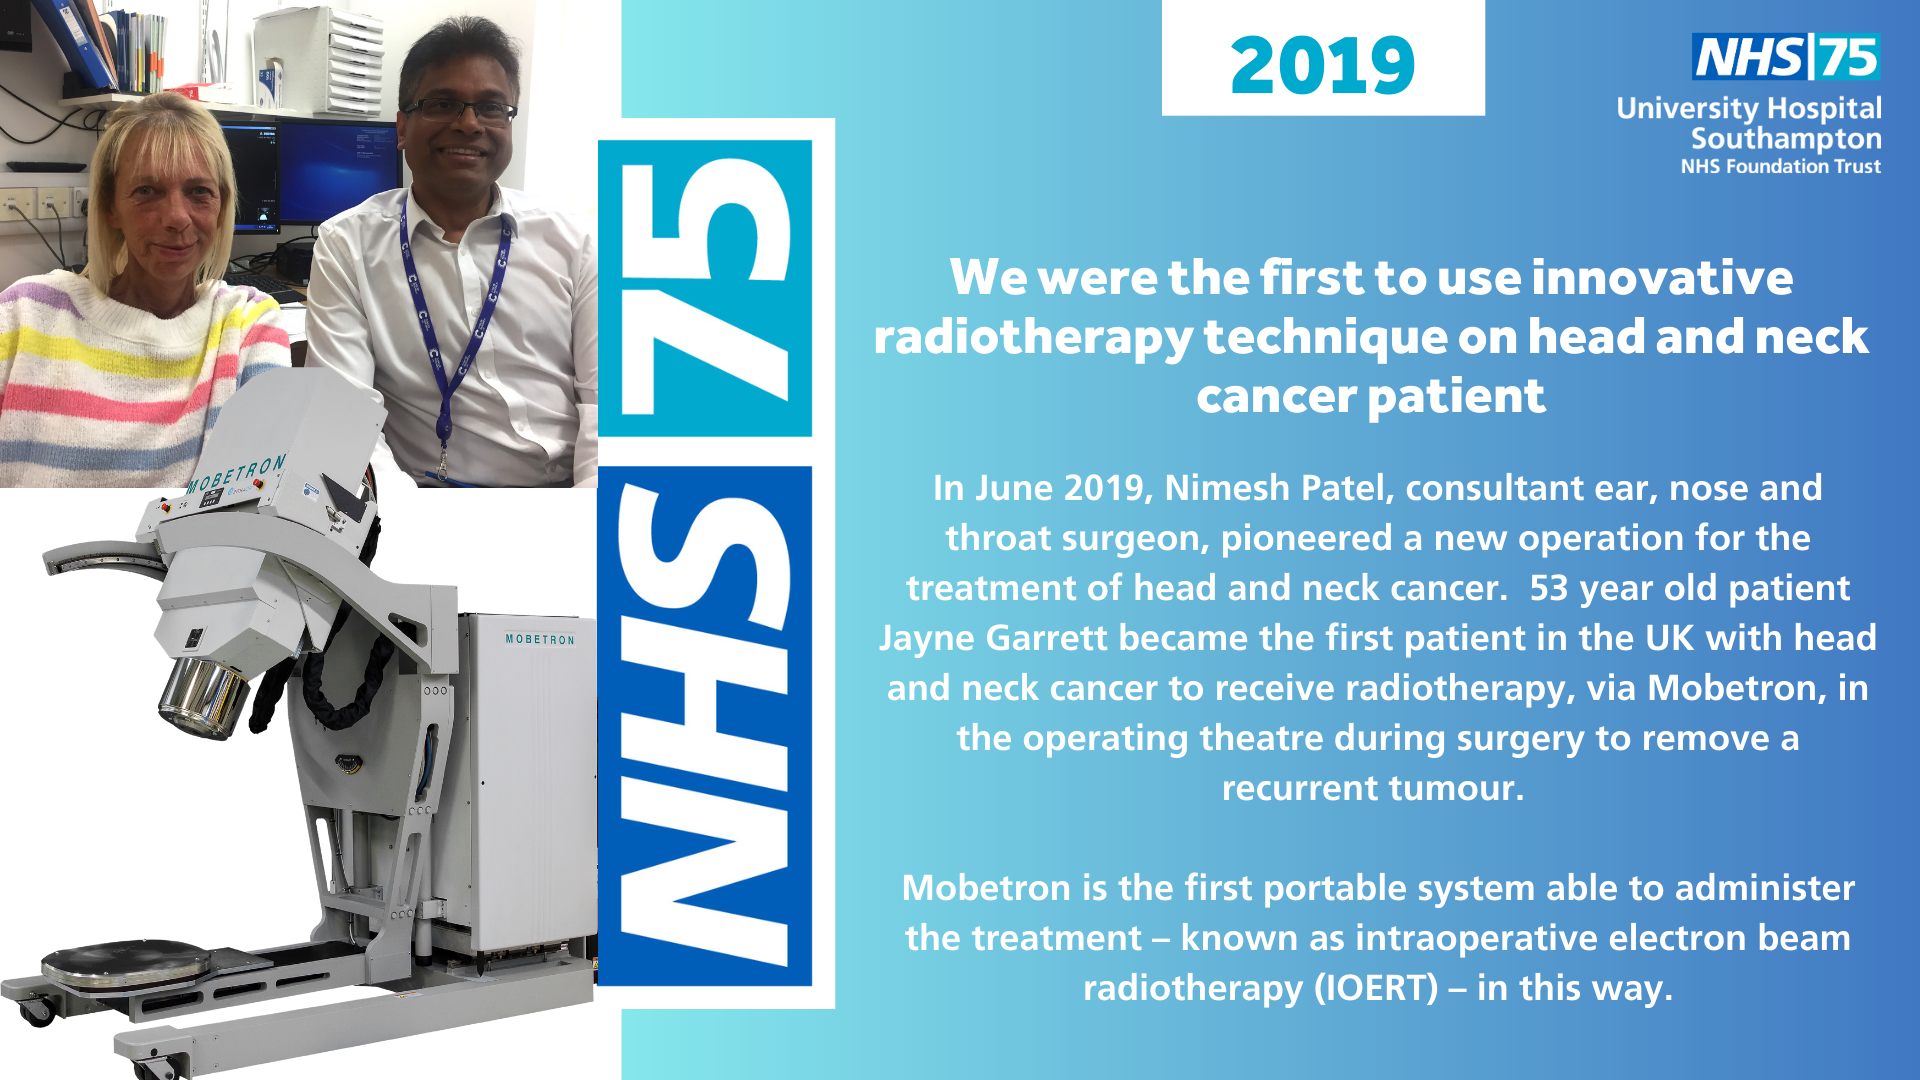 We were the first to use innovative radiotherapy technique on head and neck cancer patient